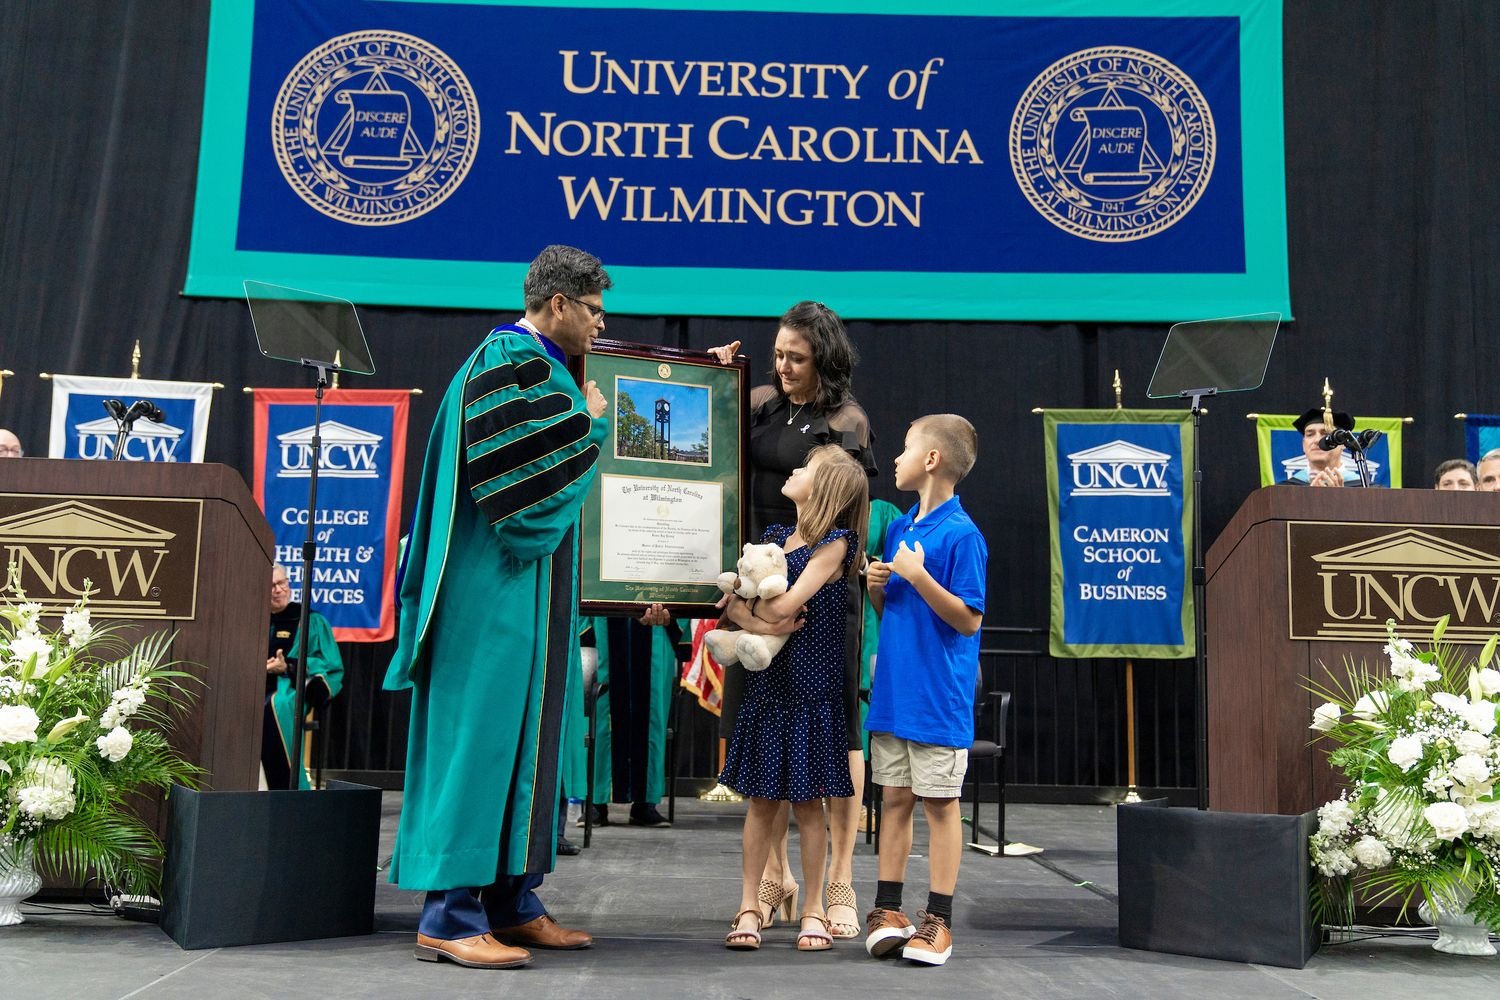 wife, Amy, and two children, Gracie and Maverick, were present to accept Jaime Jay “JJ” Young's posthumous degree.